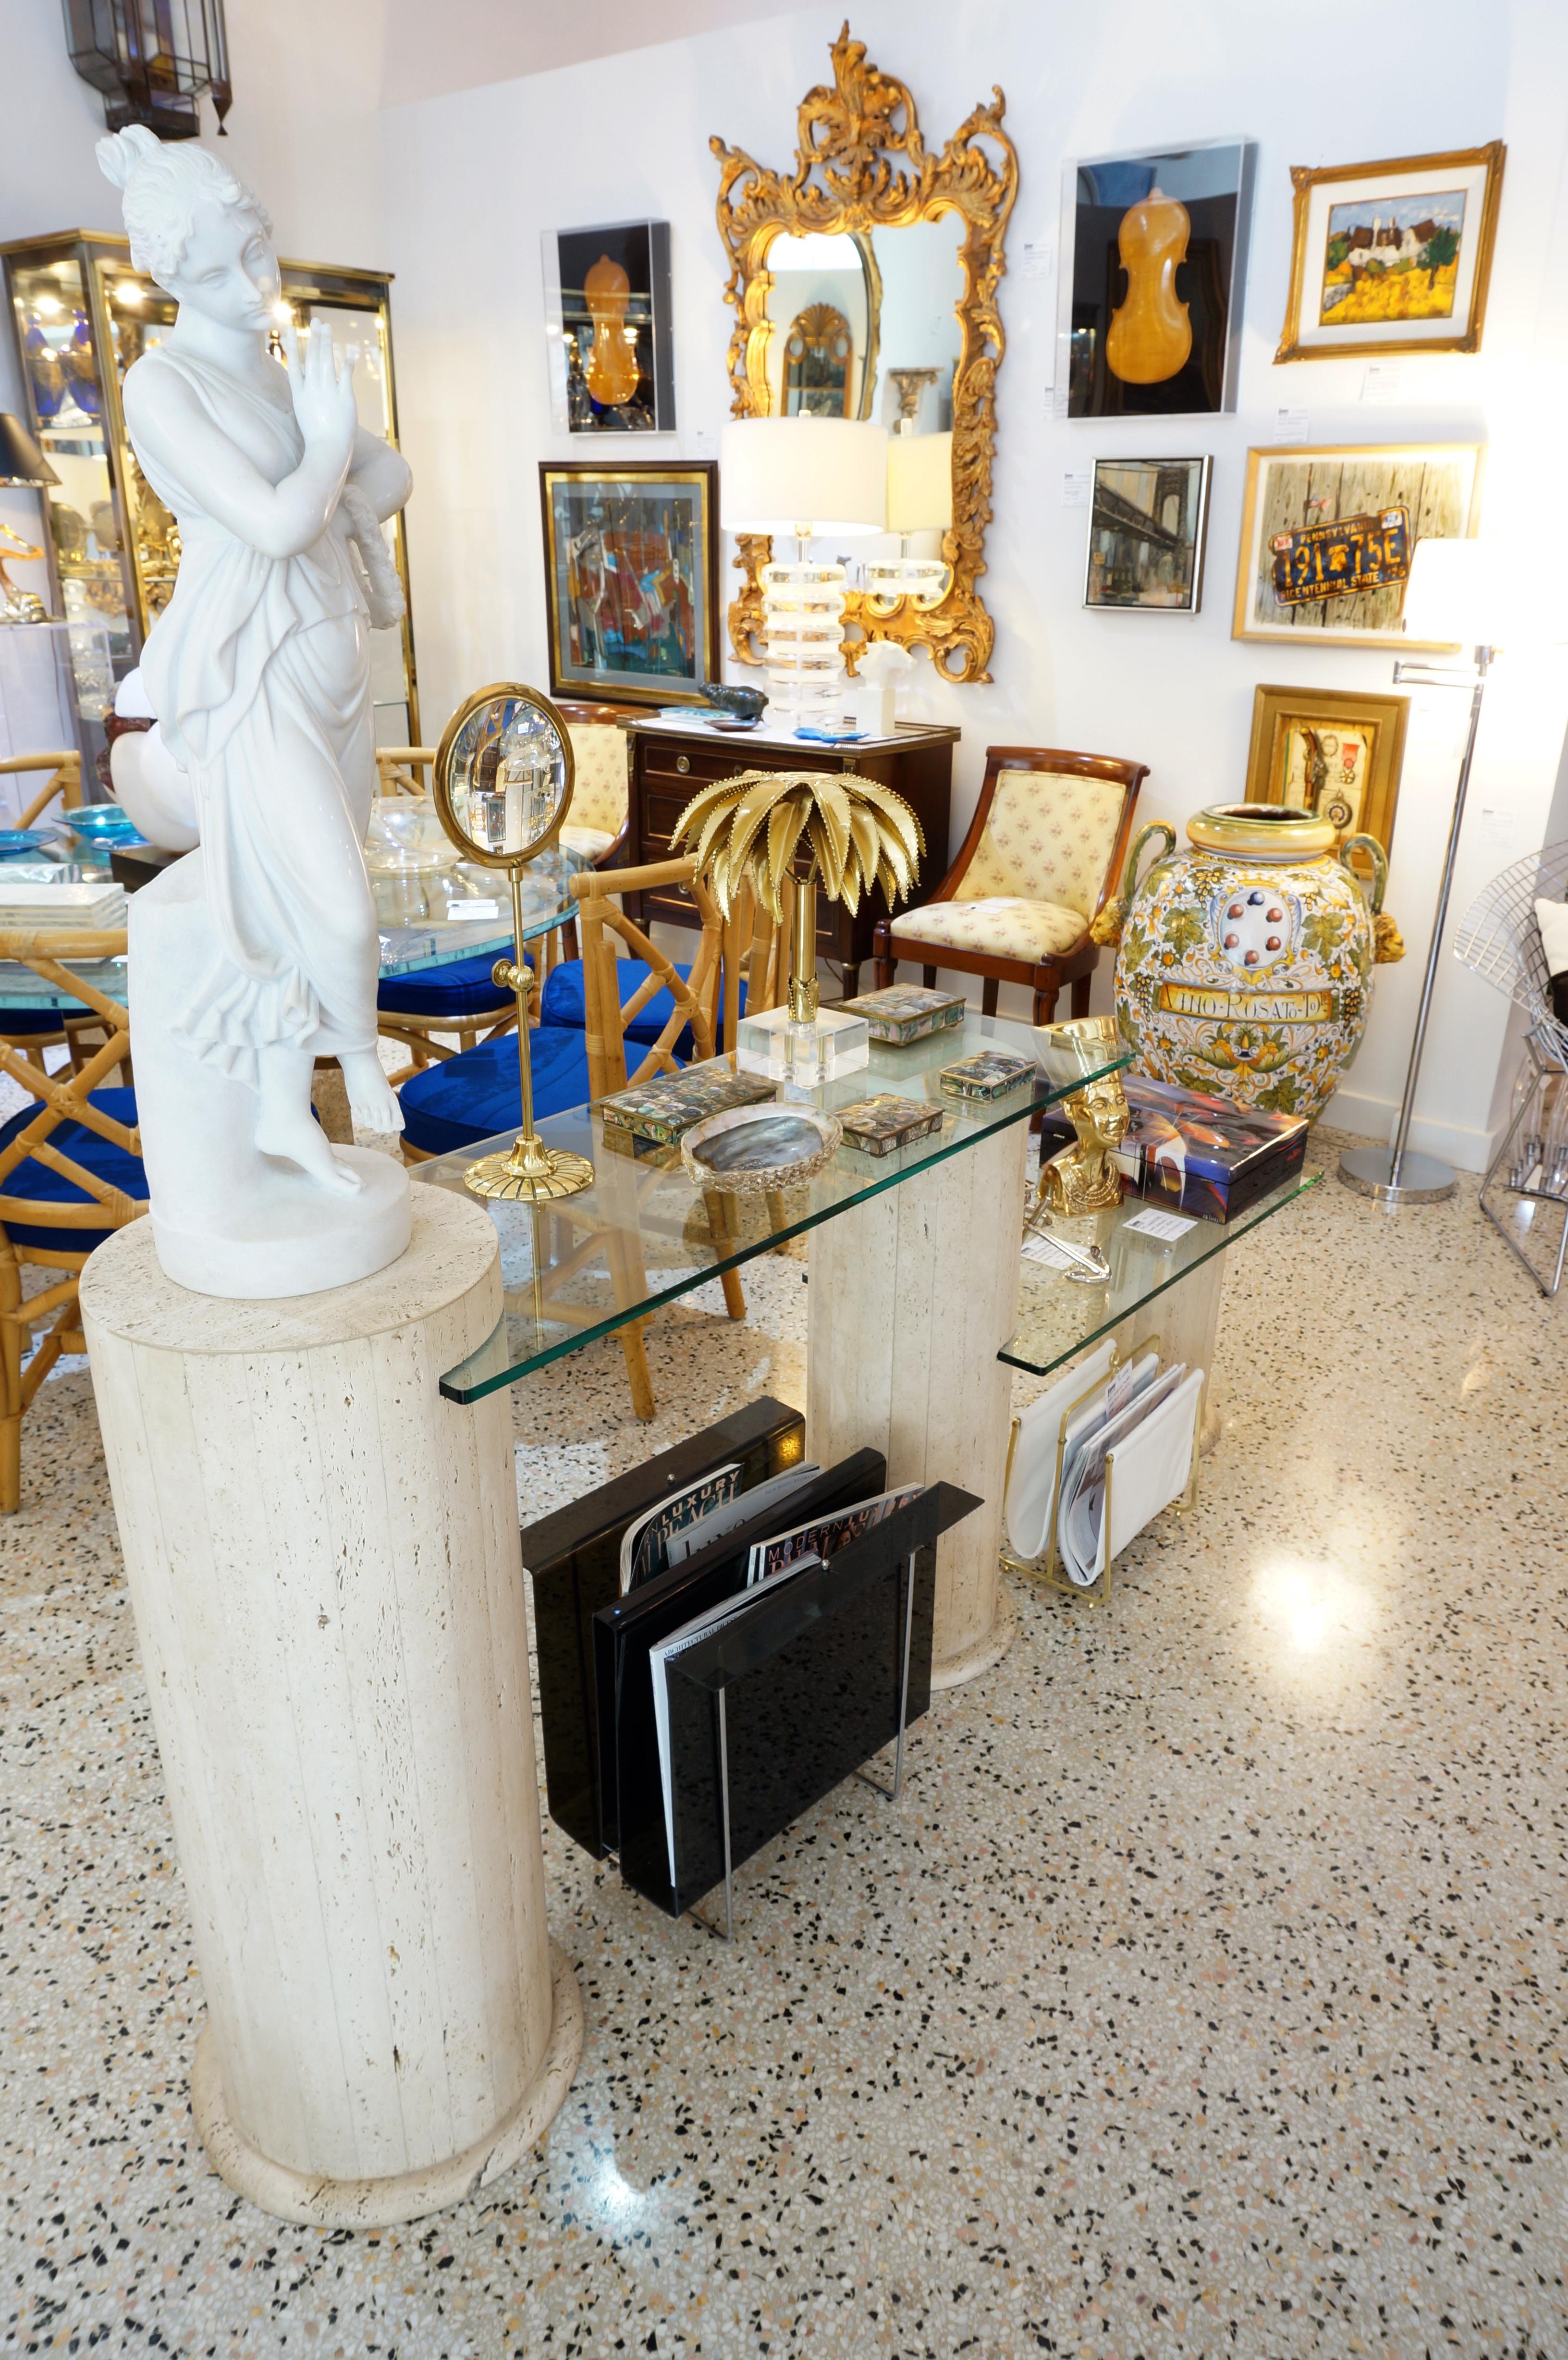 This stylish and chic artisan created brass and lucite sculpture of a royal palm was acquired from a Palm Beach estate and it will add a bit of hollywood regency glamour to your home.

Note: The lucite has been professionally polished.